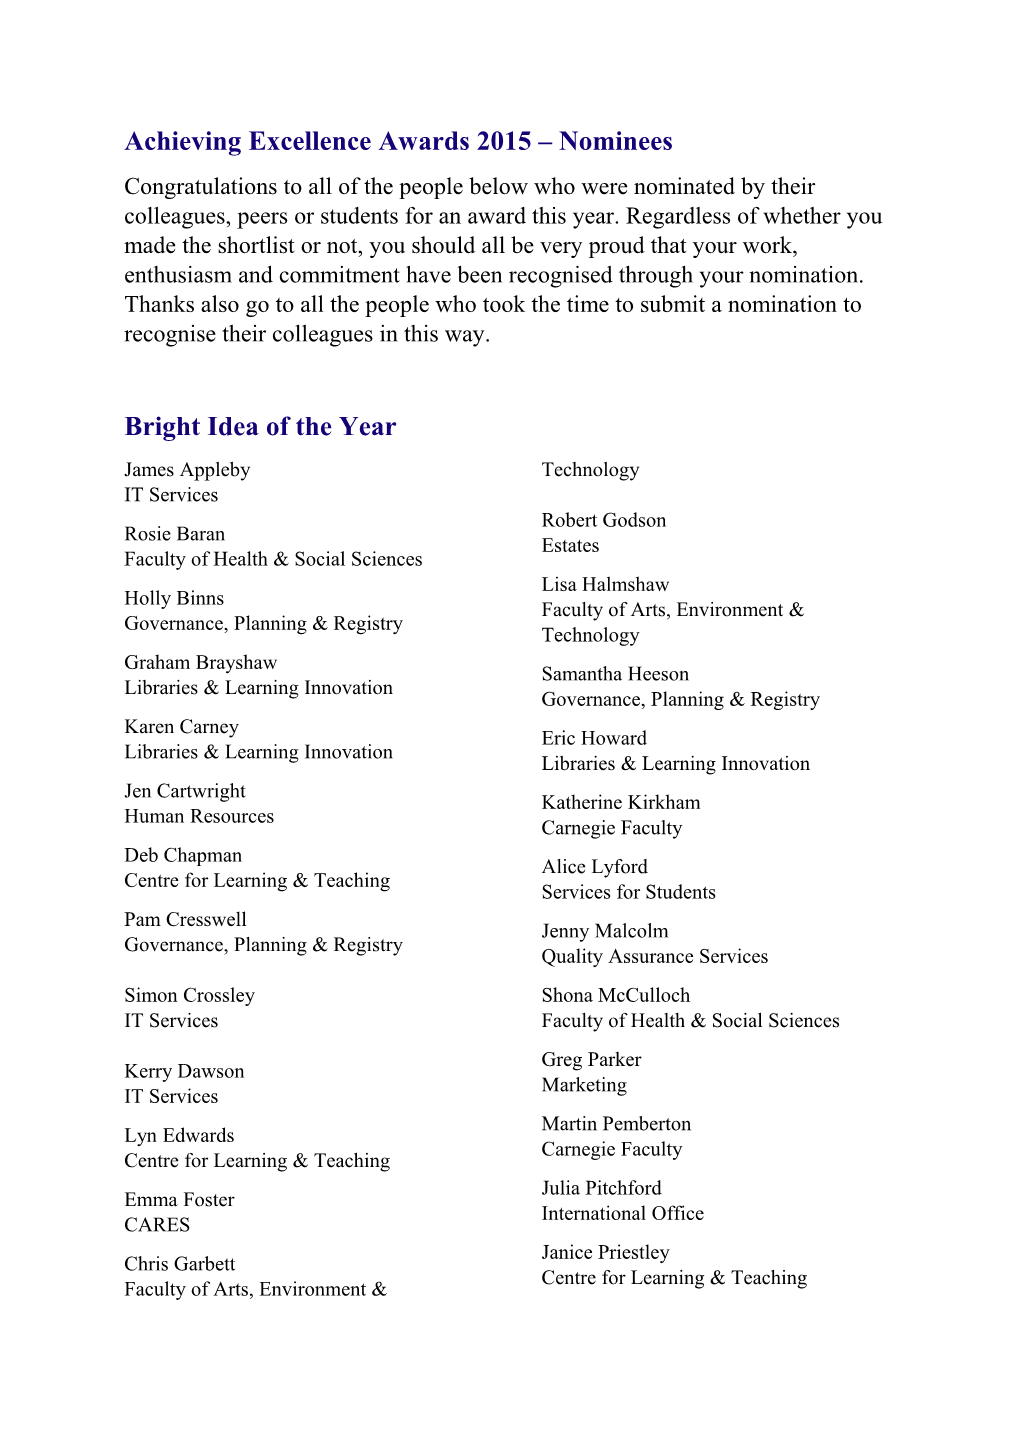 Achieving Excellence Awards 2015 Nominees